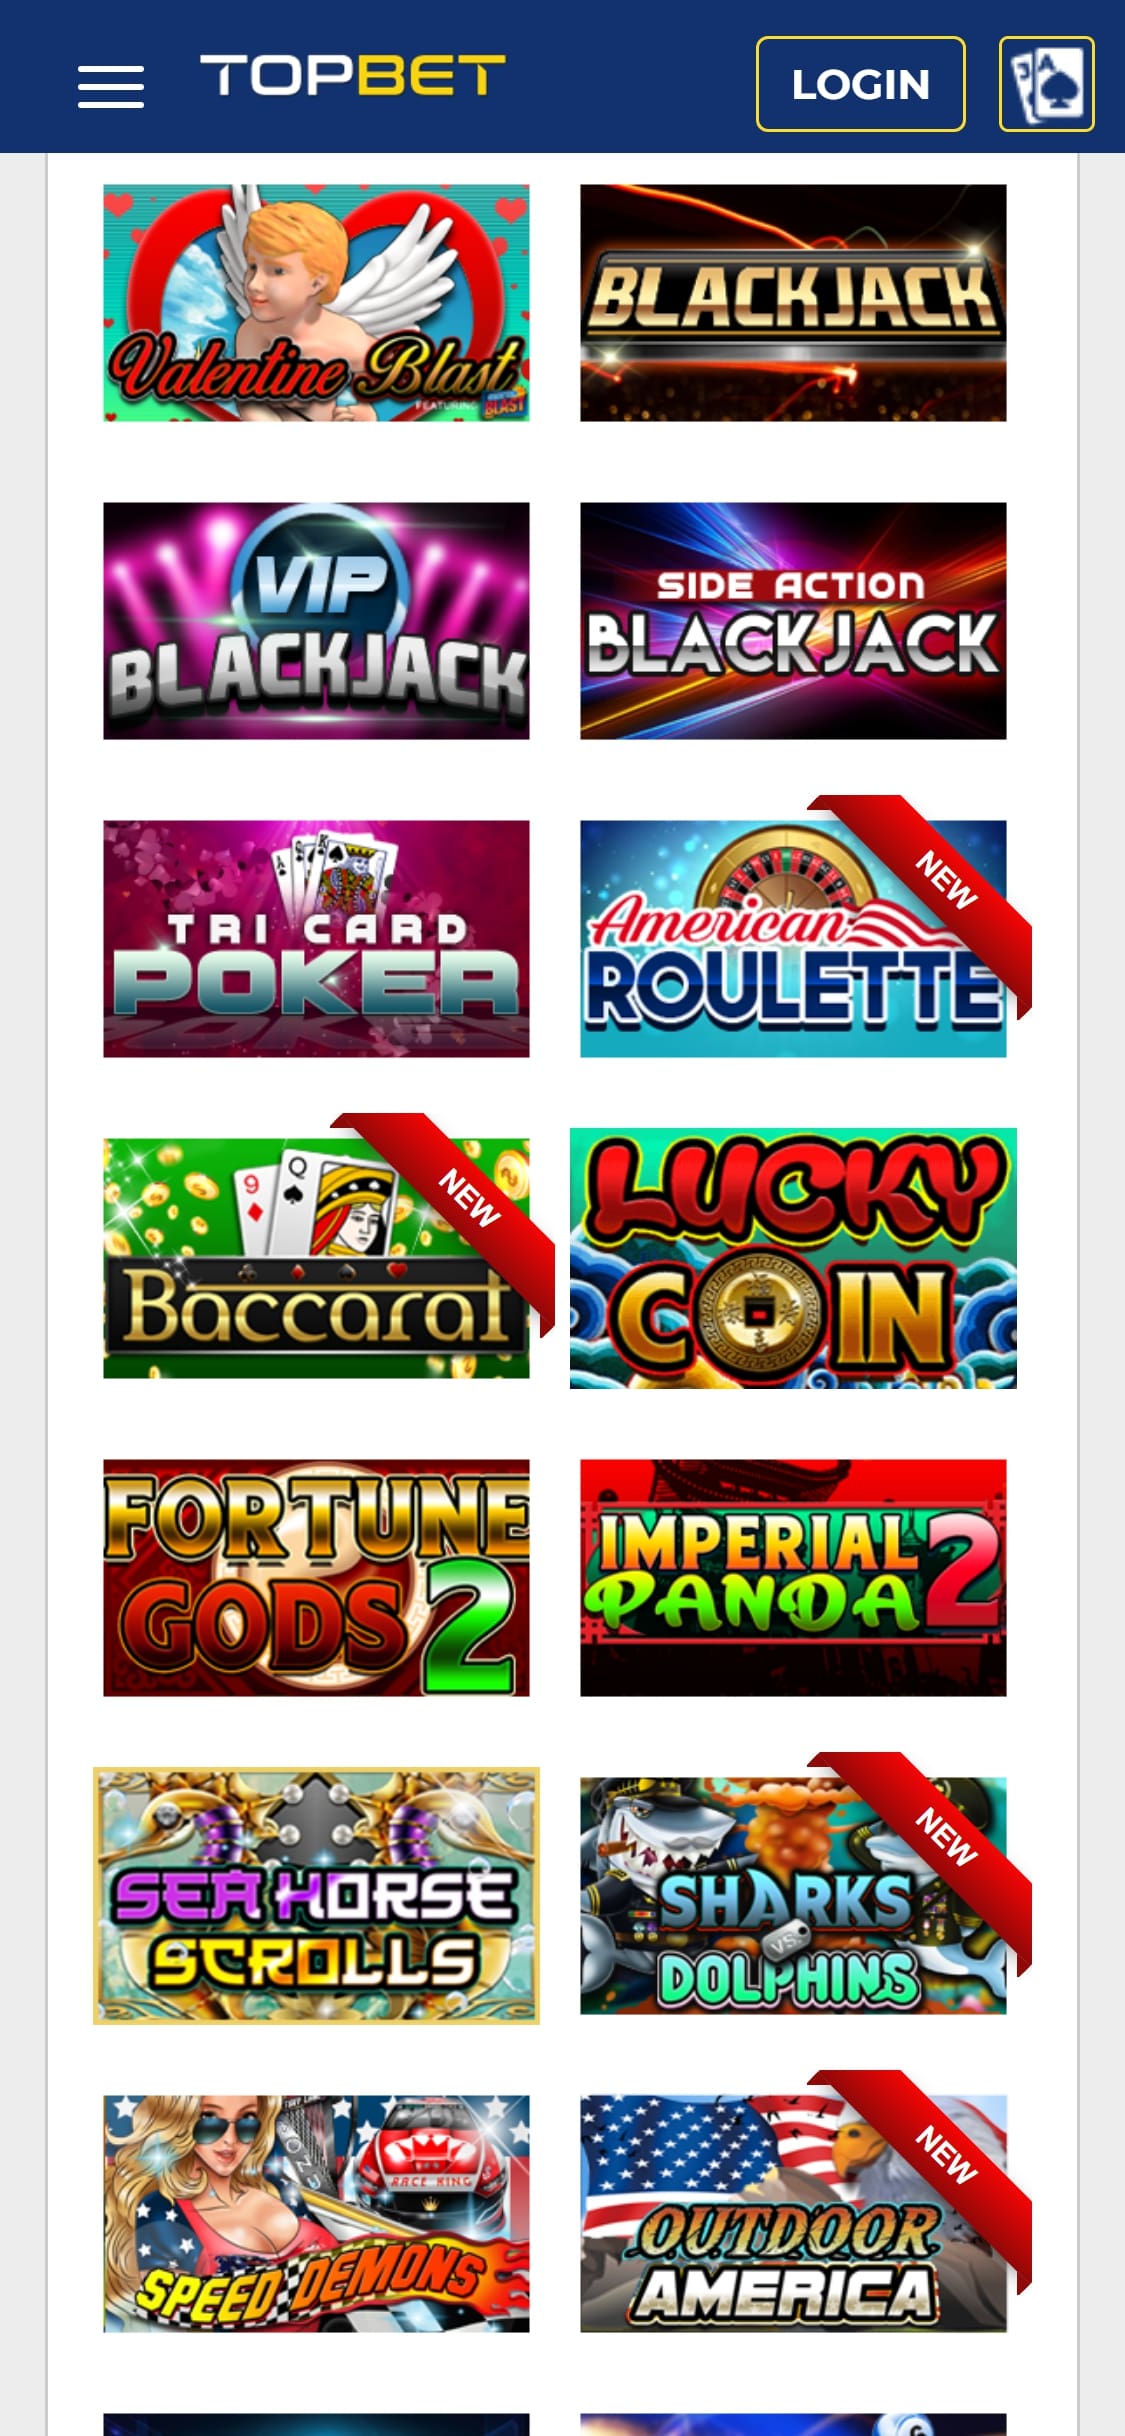 Top Bet Casino Mobile Games Review